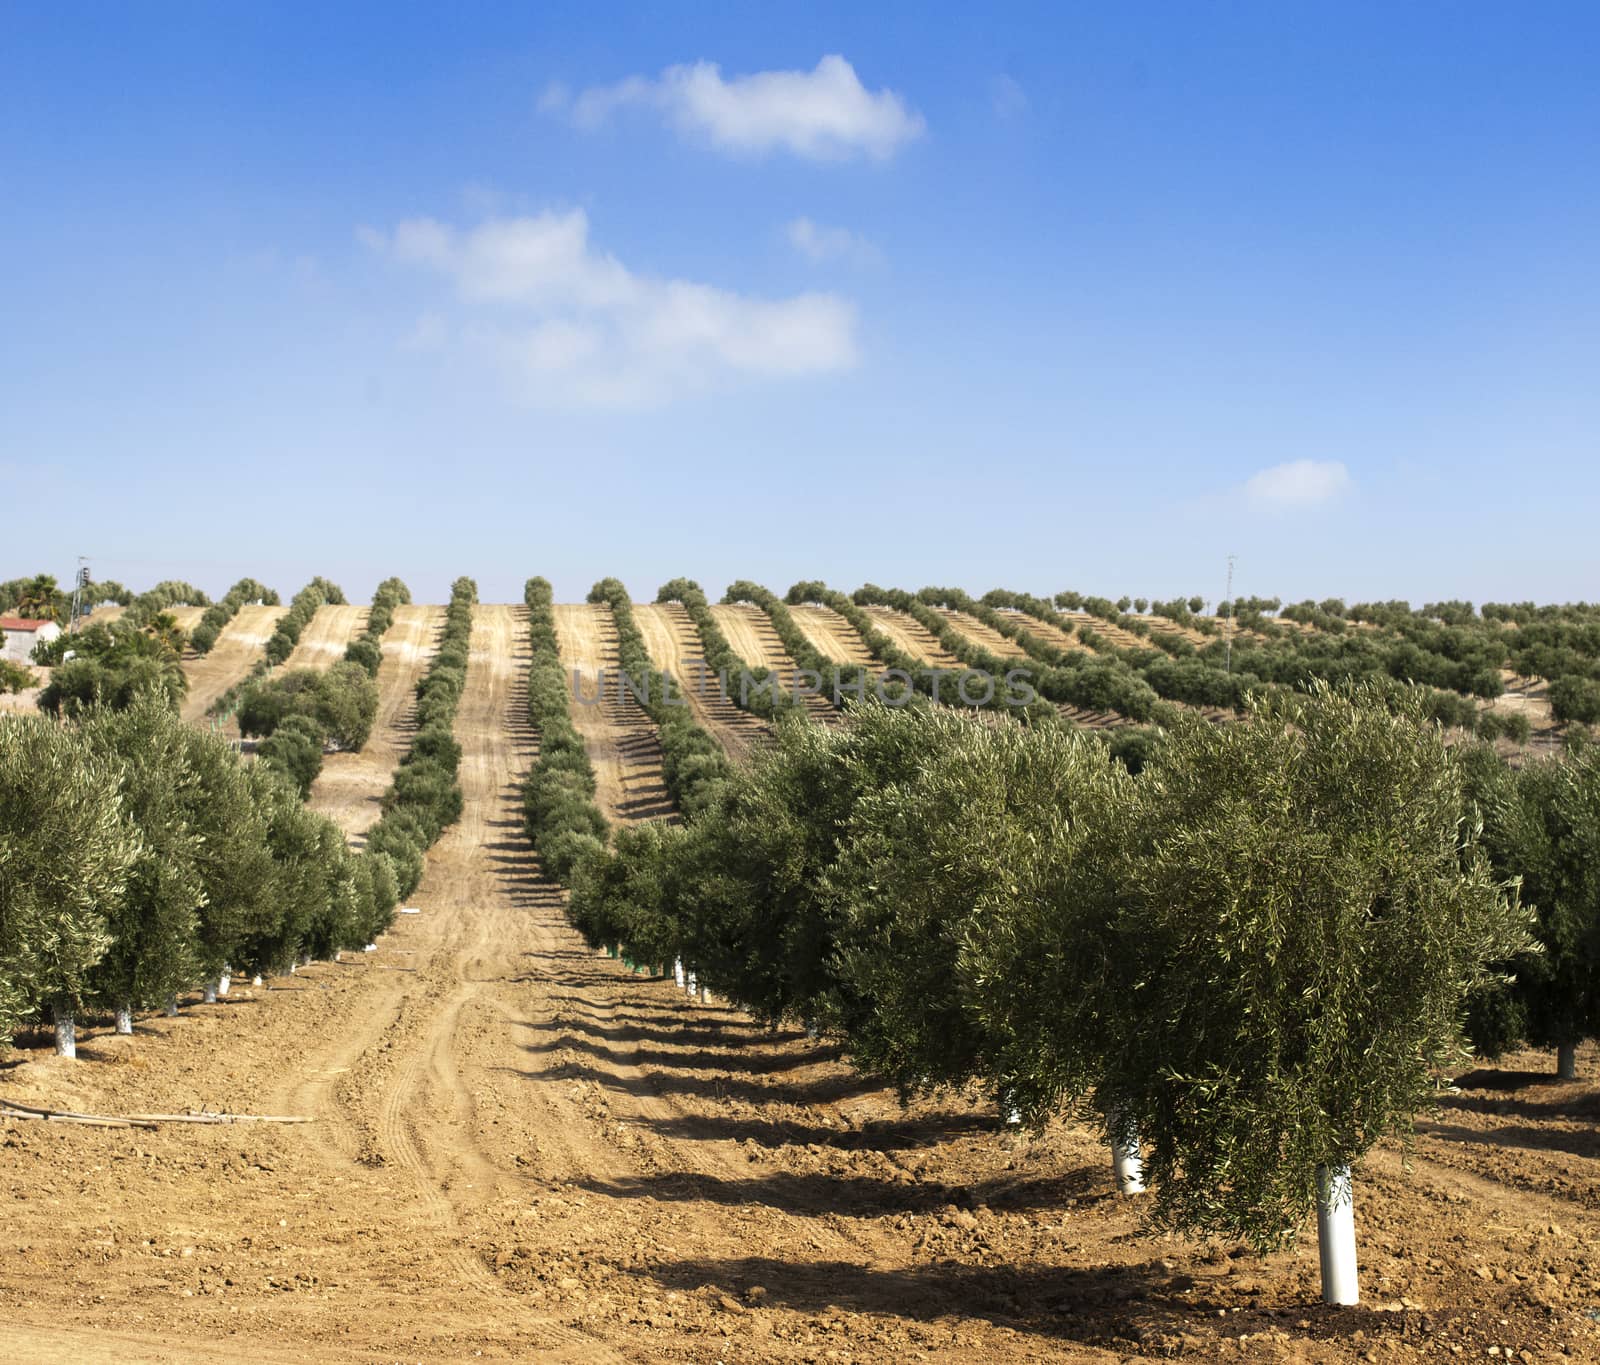 Young olive trees. Newly planted trees in the plantation